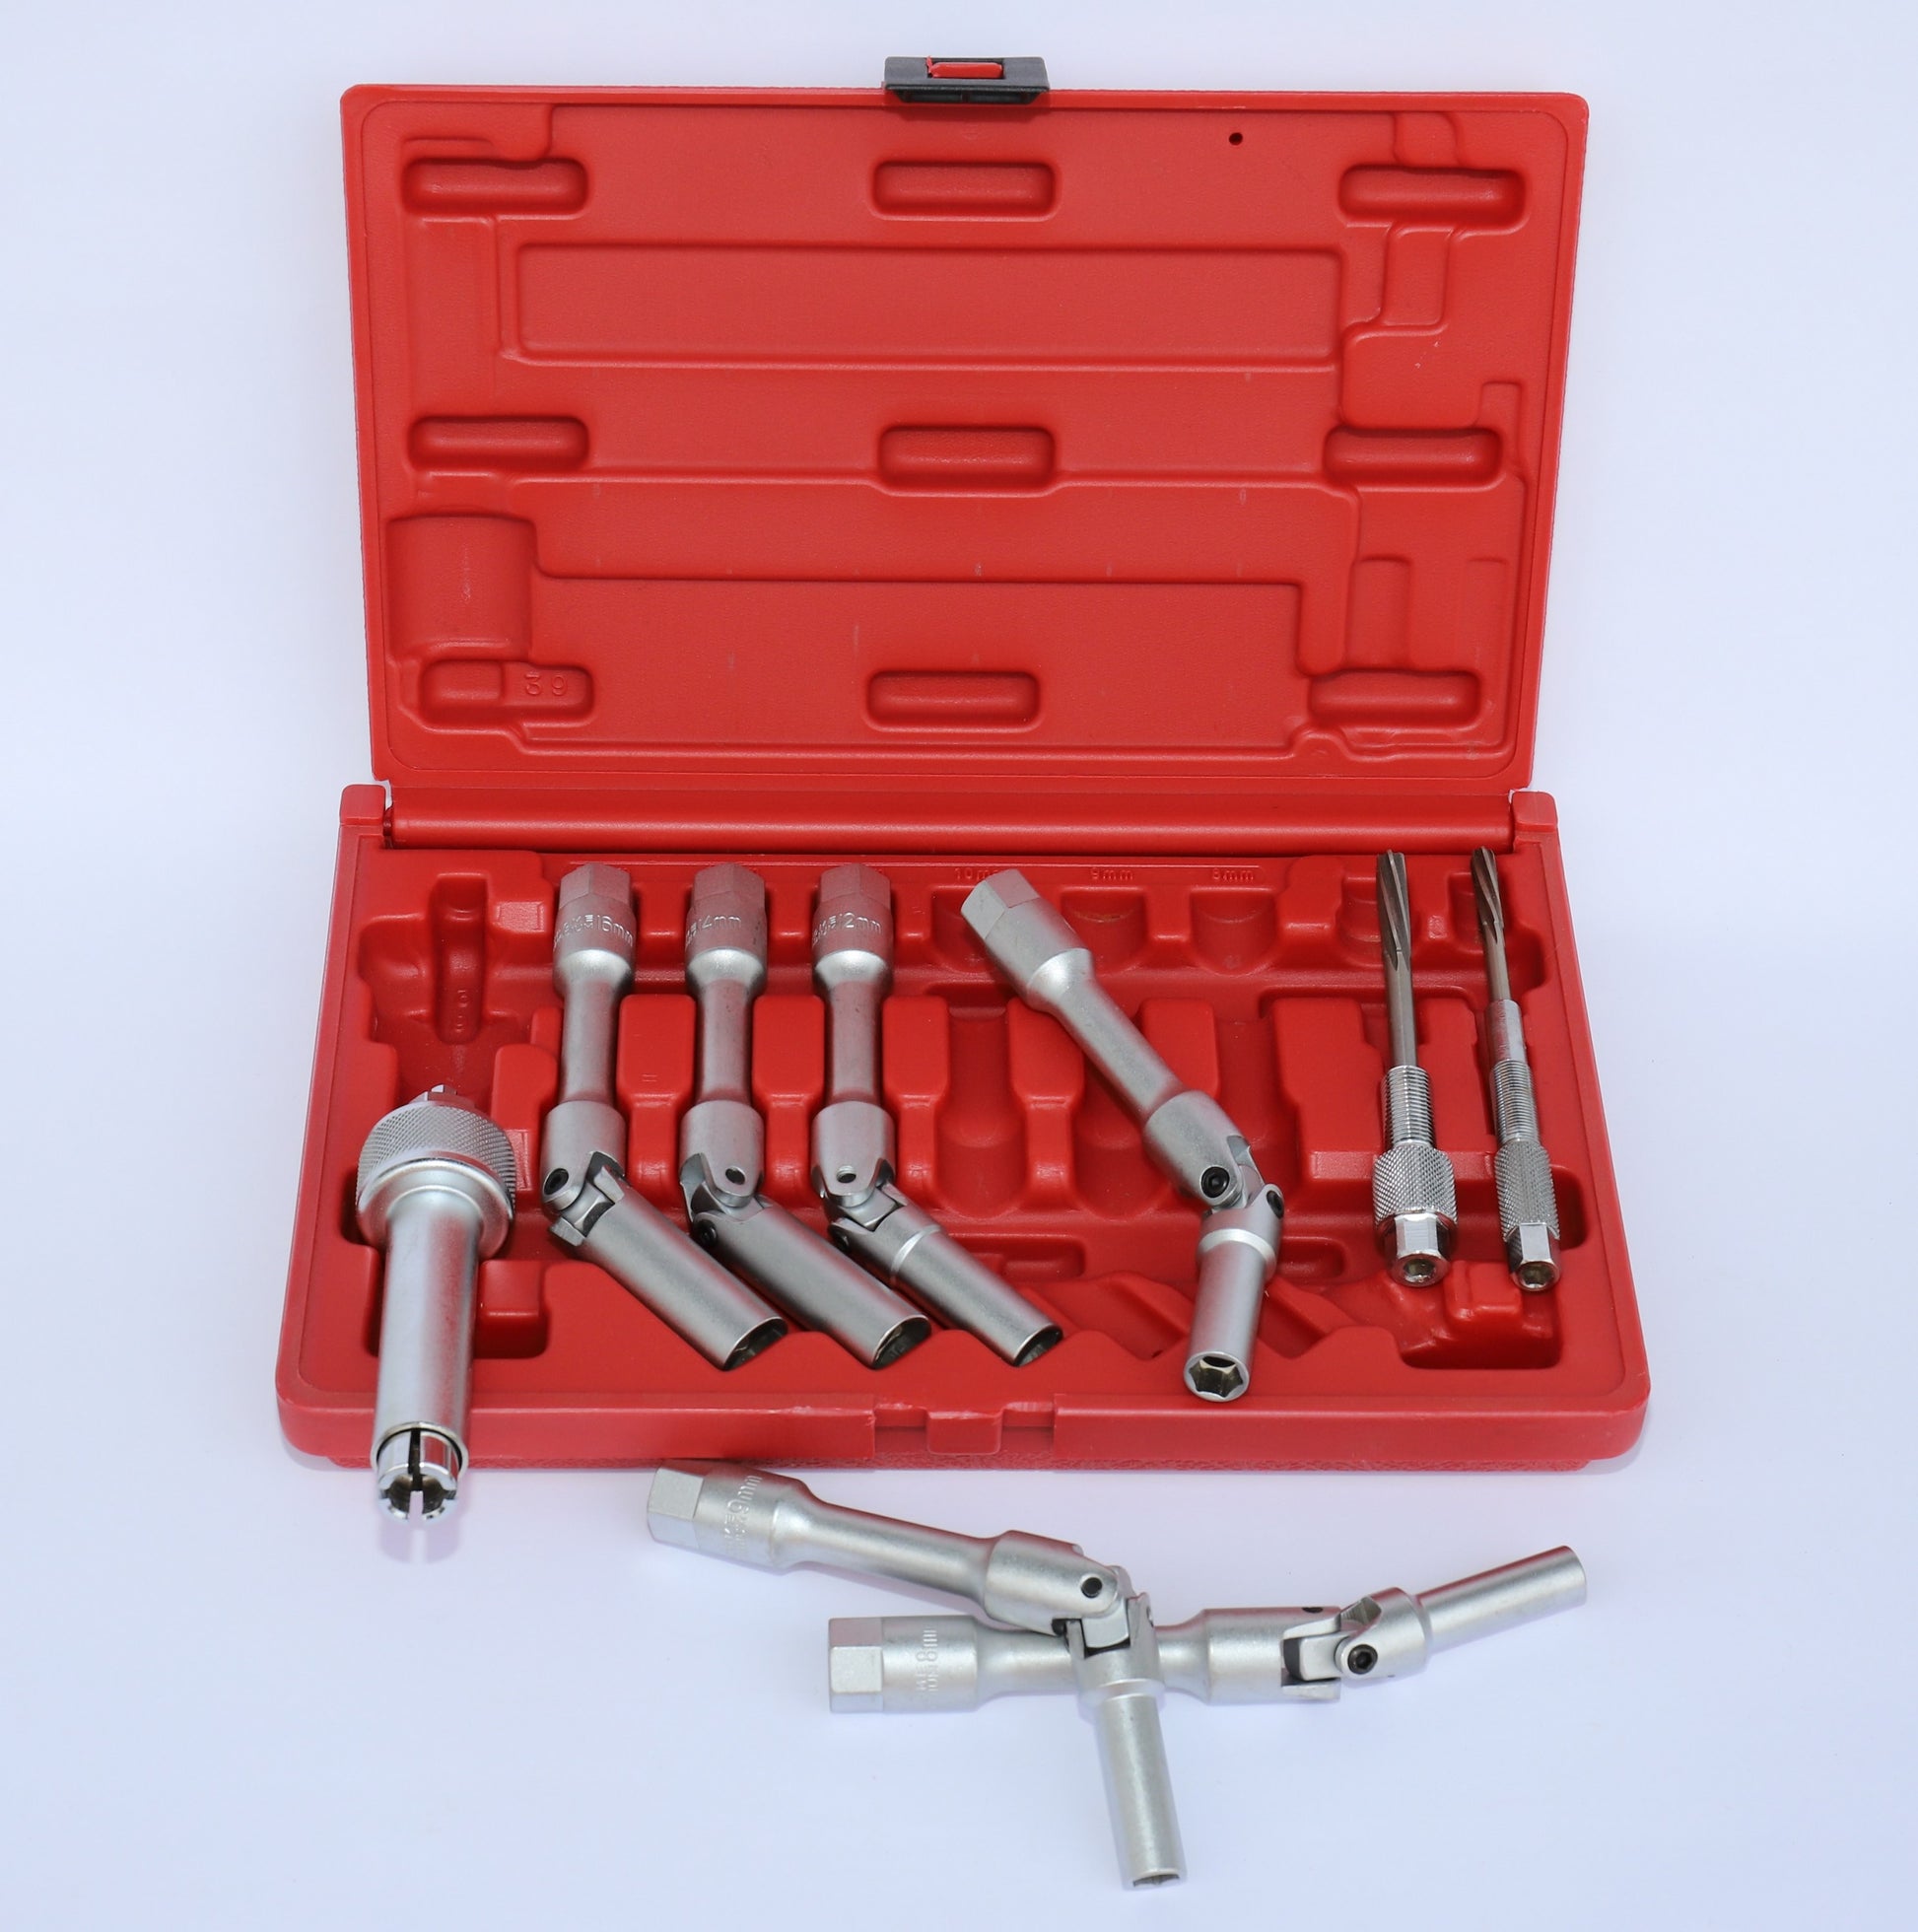 Glow Plug  Extra Long Universal Jointed Socket Set - with Special Puller and Drills Suits Japanese, Korean and European Diesel Engines - Professional Quality Tools- Specialist Tools Australia